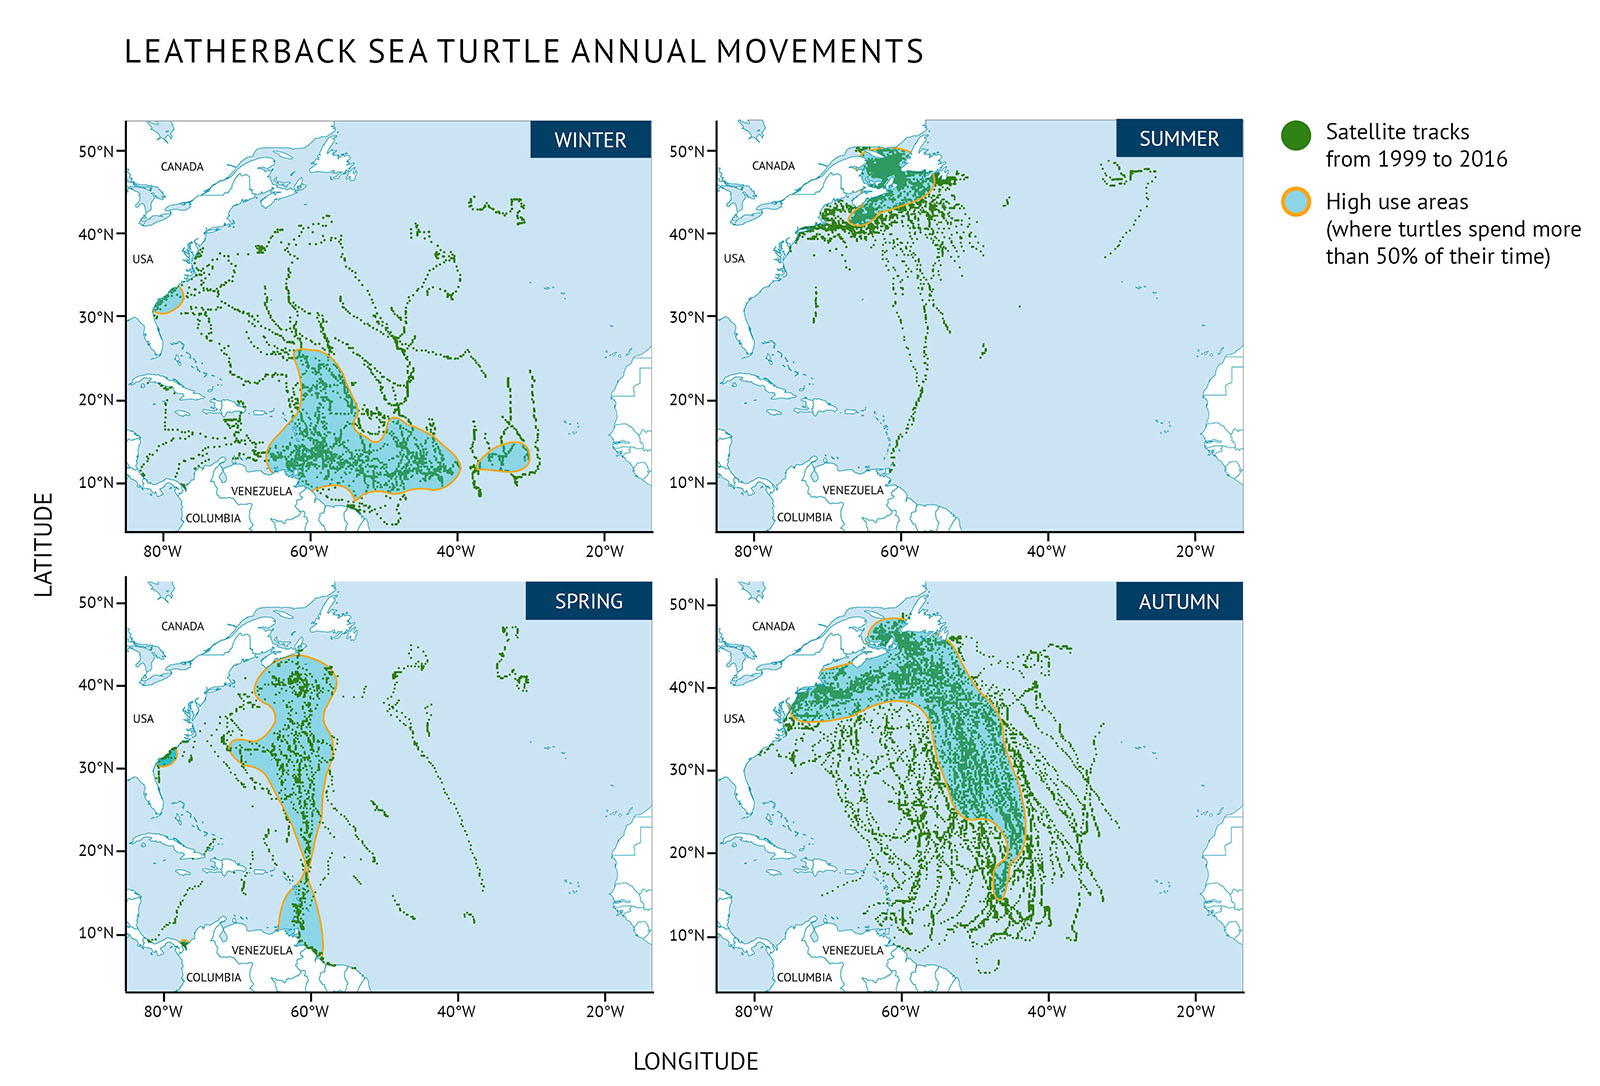 Figure 40: Seasonal movement of leatherback sea turtles through Canadian waters from 1999 to 2016 from satellite tags. The areas circled in orange represent high use areas (>50% of their time). Four maps stacked 2 by 2 of tagged leatherback sea turtle locations. Text above the graph says “Leatherback Sea Turtle Annual Movements”. Each map represents a season. The top left map is winter, bottom left is spring, top right is summer, and bottom right is autumn. Each map is the same and extends from 50°N latitude at the top to 10°N at the bottom and shows eastern North and South America from latitude with Newfoundland and Labrador at the top and Venezuela at the bottom. The bottom axis of each graph extends from approximately 80°W at the left to 20°W at the right where the western coast of Africa is visible. A legend appears at the right. The satellite tag locations from 1999 to 2016 are represented on the maps by green dots. High use areas, where turtles spend more than 50% of their time, and represented by areas outlined with orange and shaded blue. On the top left map of winter, lines of green dots extend from off the coast of North America down to South America. There is a blue shaded area on the southern coast of the United States. Another larger blue shaded area extends from the coast of Venezuela to the north and east with a smaller area approximately midway between South America and Africa. On the bottom left map of spring, there green dots extend from North America to South America. There is a small blue shaded area off the southern coast of the United States, and a large shaded area which extends from Nova Scotia down to Venezuela. On the top right map of summer, a large number of green dots are close to North America from the Gulf of St. Lawrence and the south coast of Newfoundland down the northeast coast of the United States. A few lines of green dots extend down to Venezuela in South America, and there are some shorter lines of green dots in the northern mid-Atlantic between 30°W and 40°W longitude. On the bottom right map of autumn, many lines of green dots extend between the east coast of North America and Venezuela out towards the middle of the Atlantic. A large shaded area extends from The Gulf of St. Lawrence and south coast of Newfoundland, down the east coast of North America and narrows as it extends southeast to the mid-Atlantic ending around 15°N latitude.